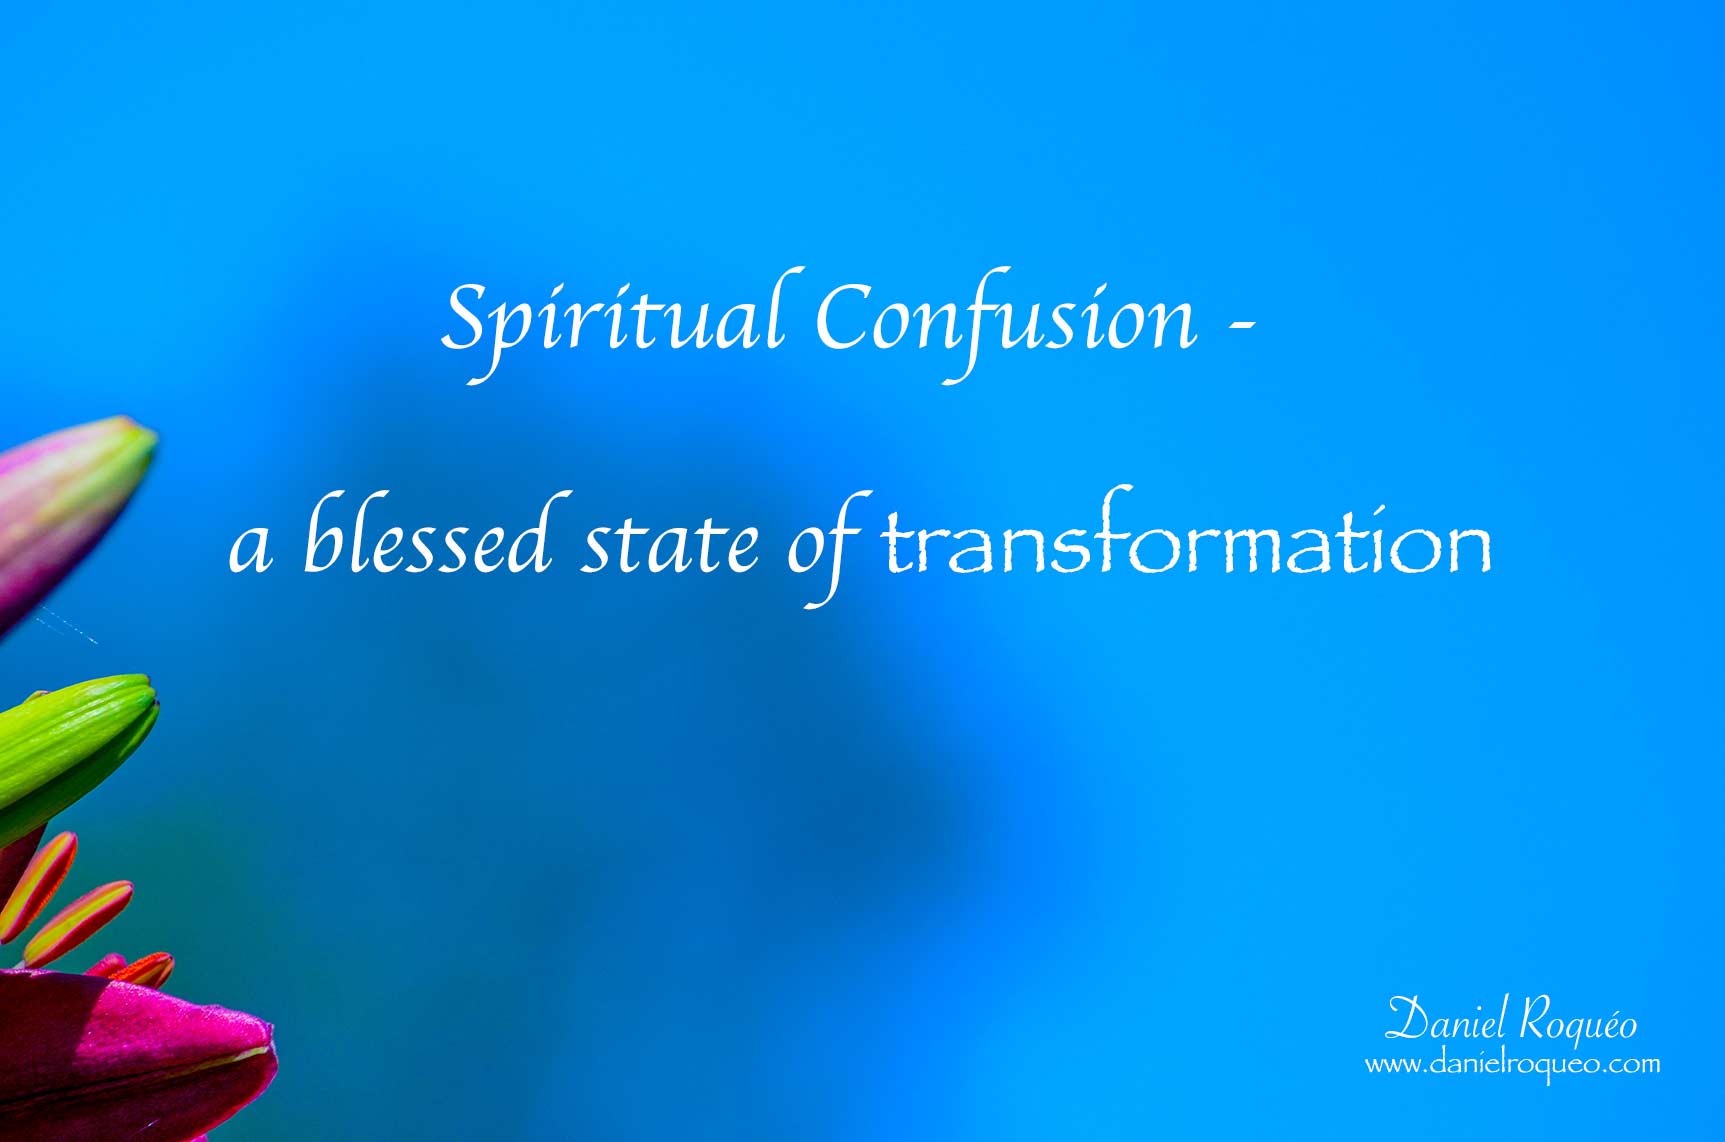 Spiritual confusion is a blessed state of transformation